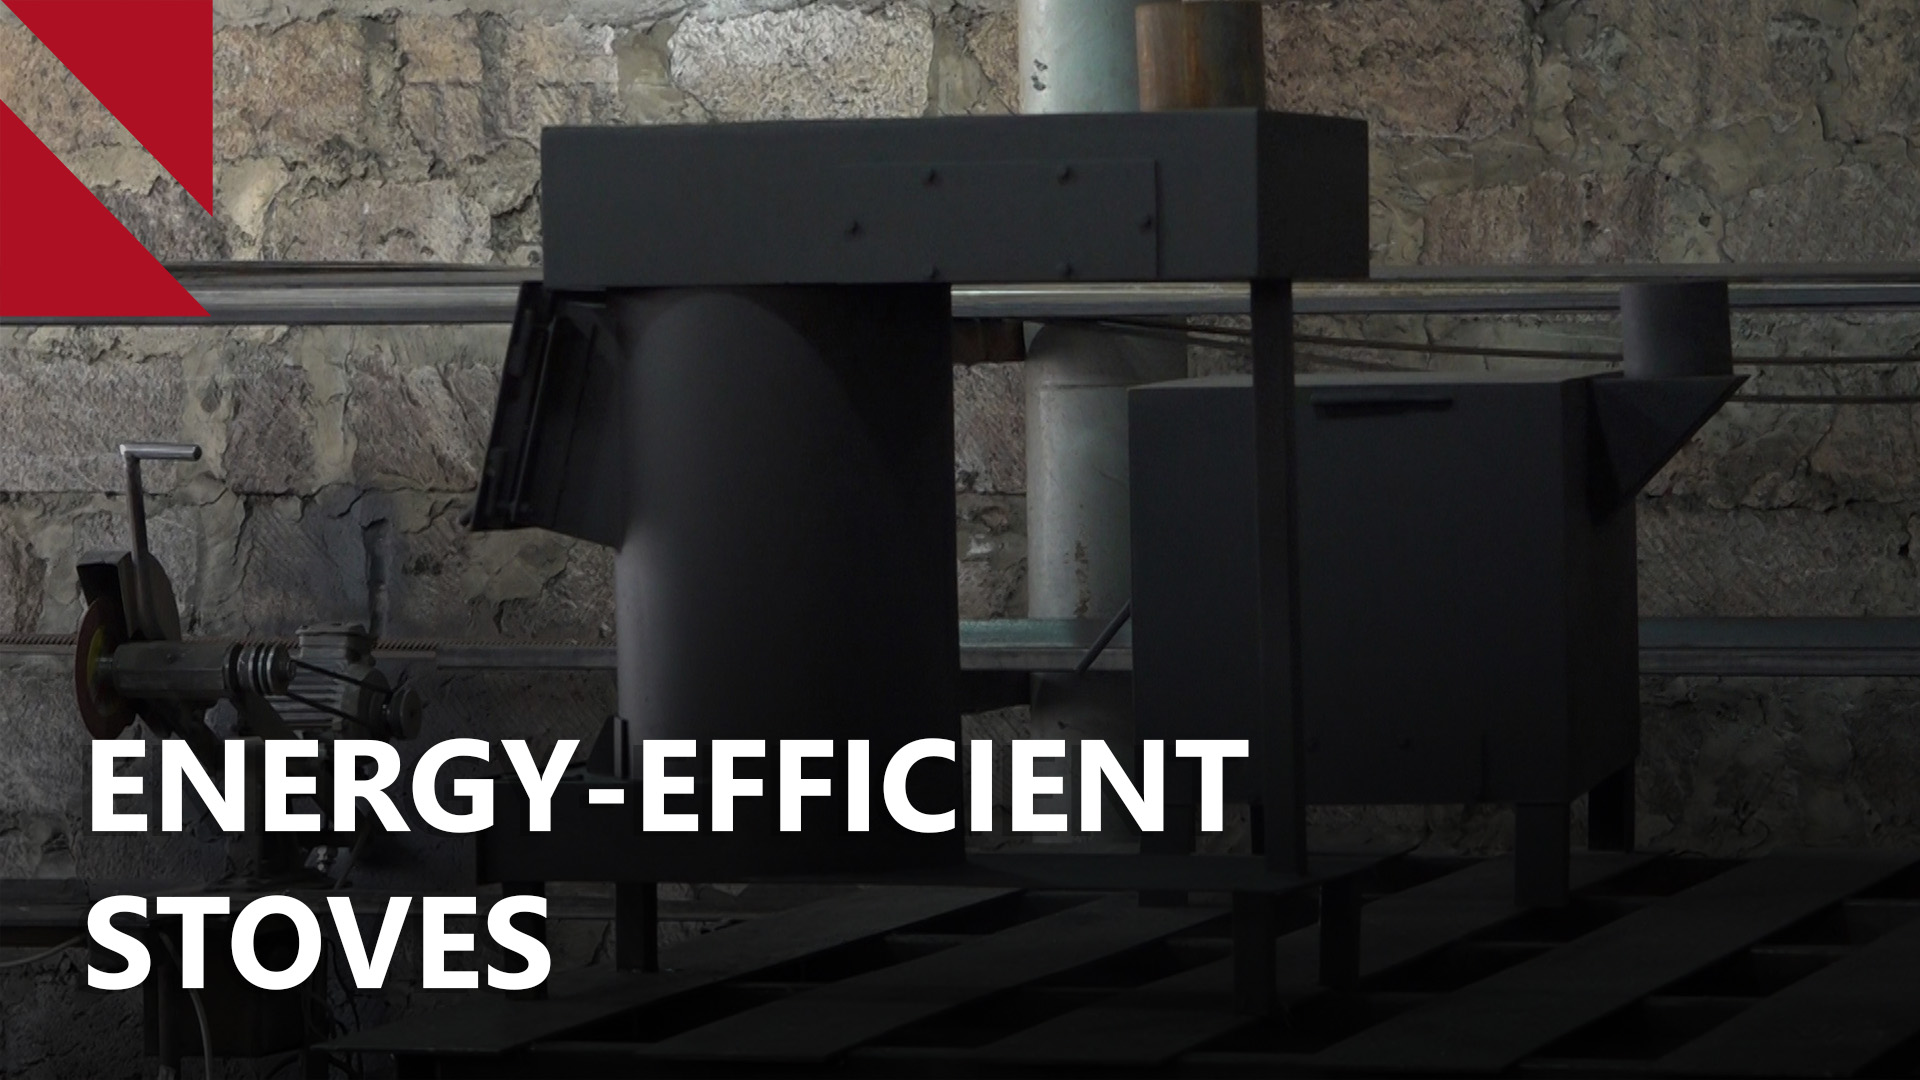 Energy-efficient stoves